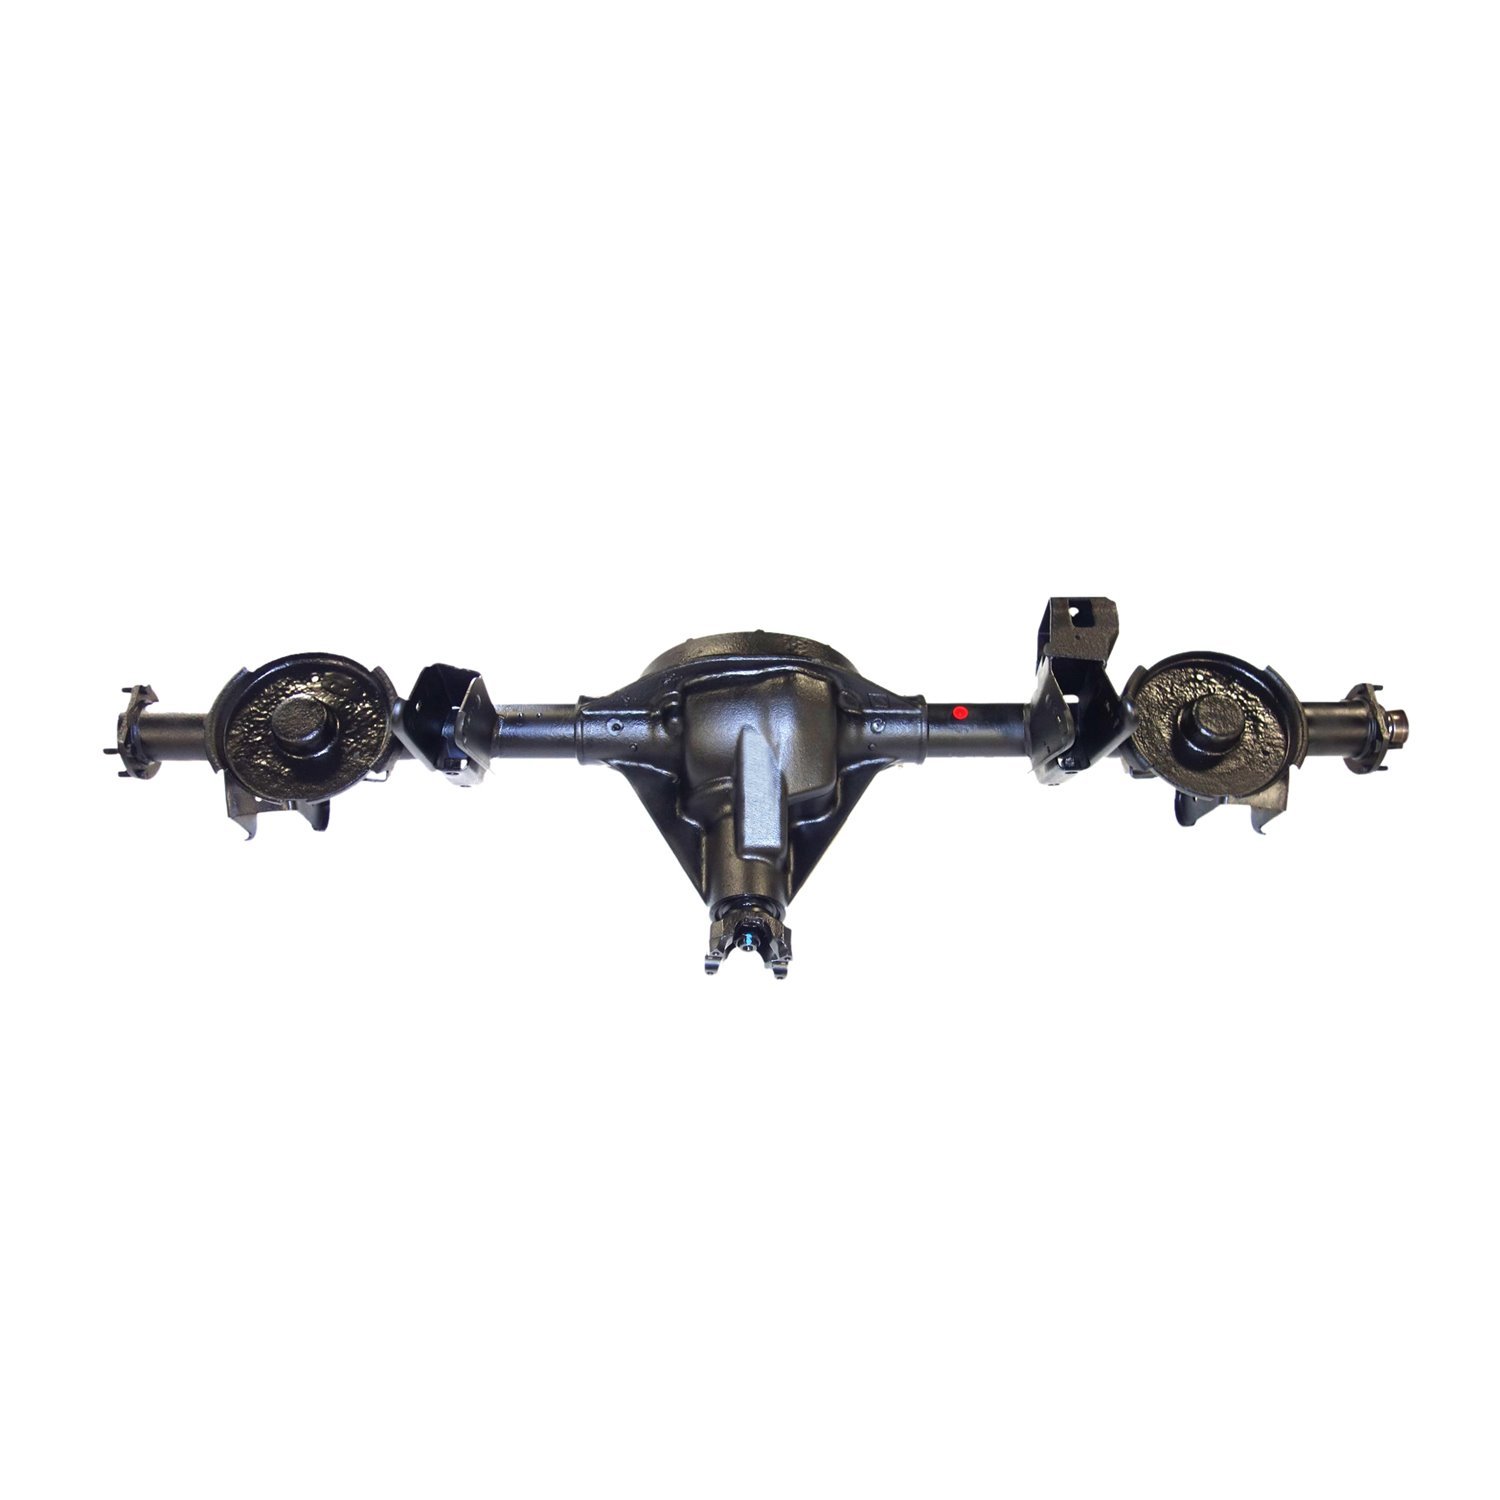 Remanufactured Complete Axle Assembly for Dana 35 87-89 Jeep Wrangler 3.08 Ratio